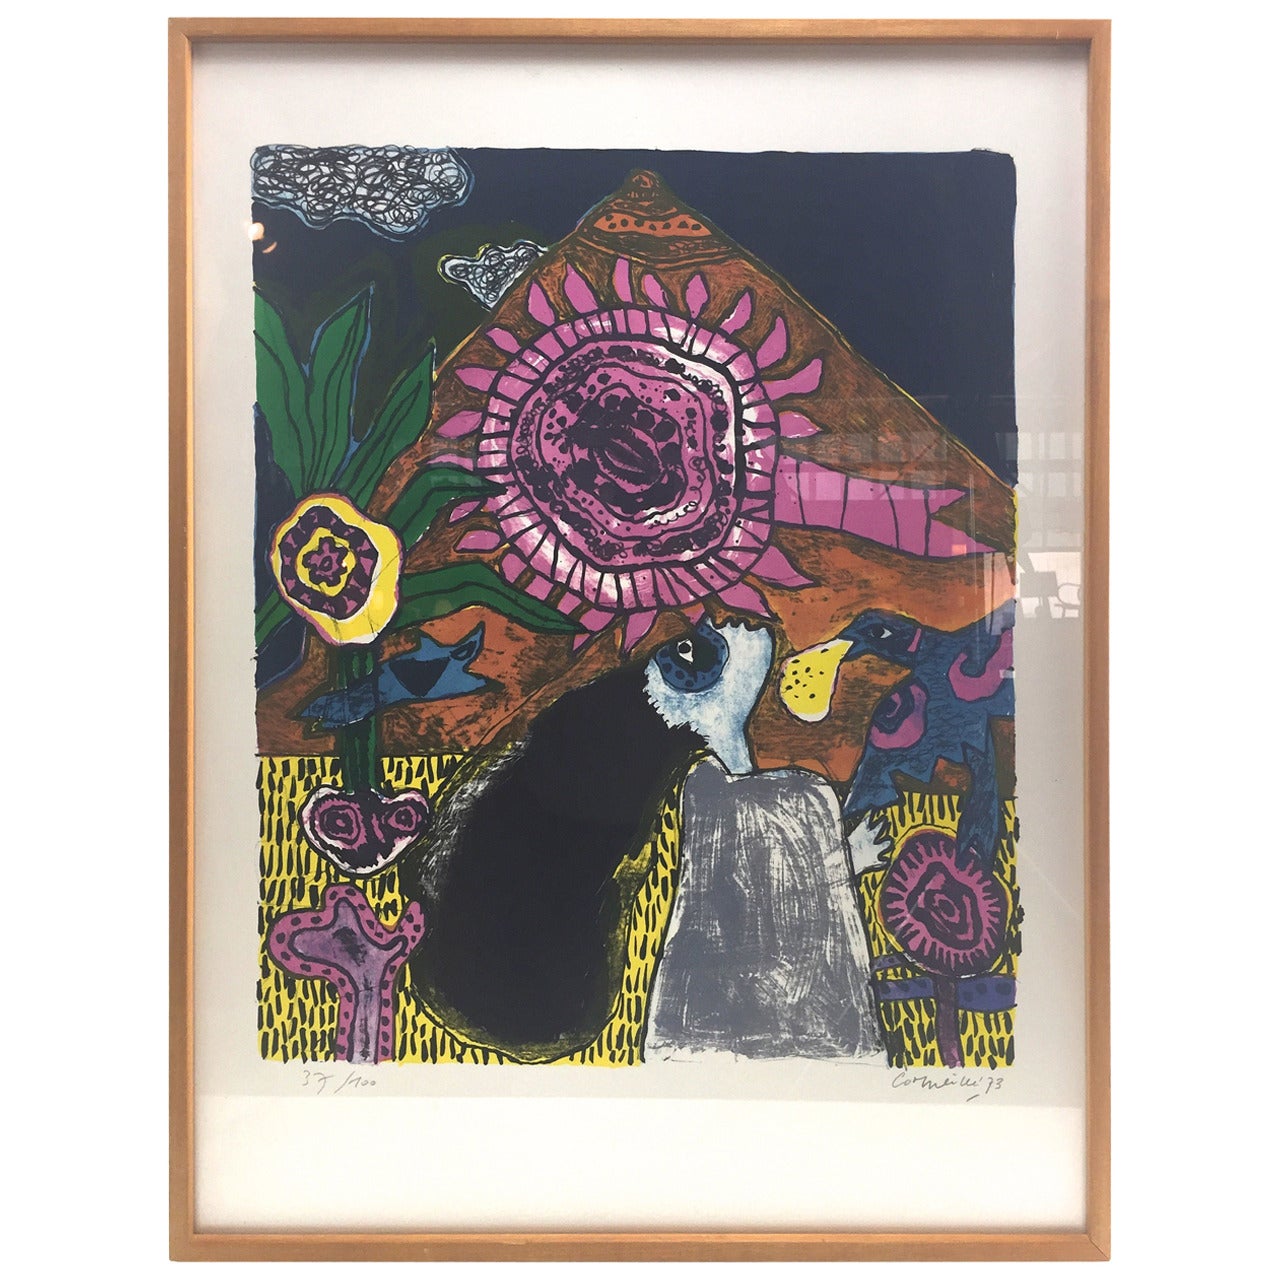 Signed Lithograph "Untitled" by Corneille, 1973 Edition of 37/100